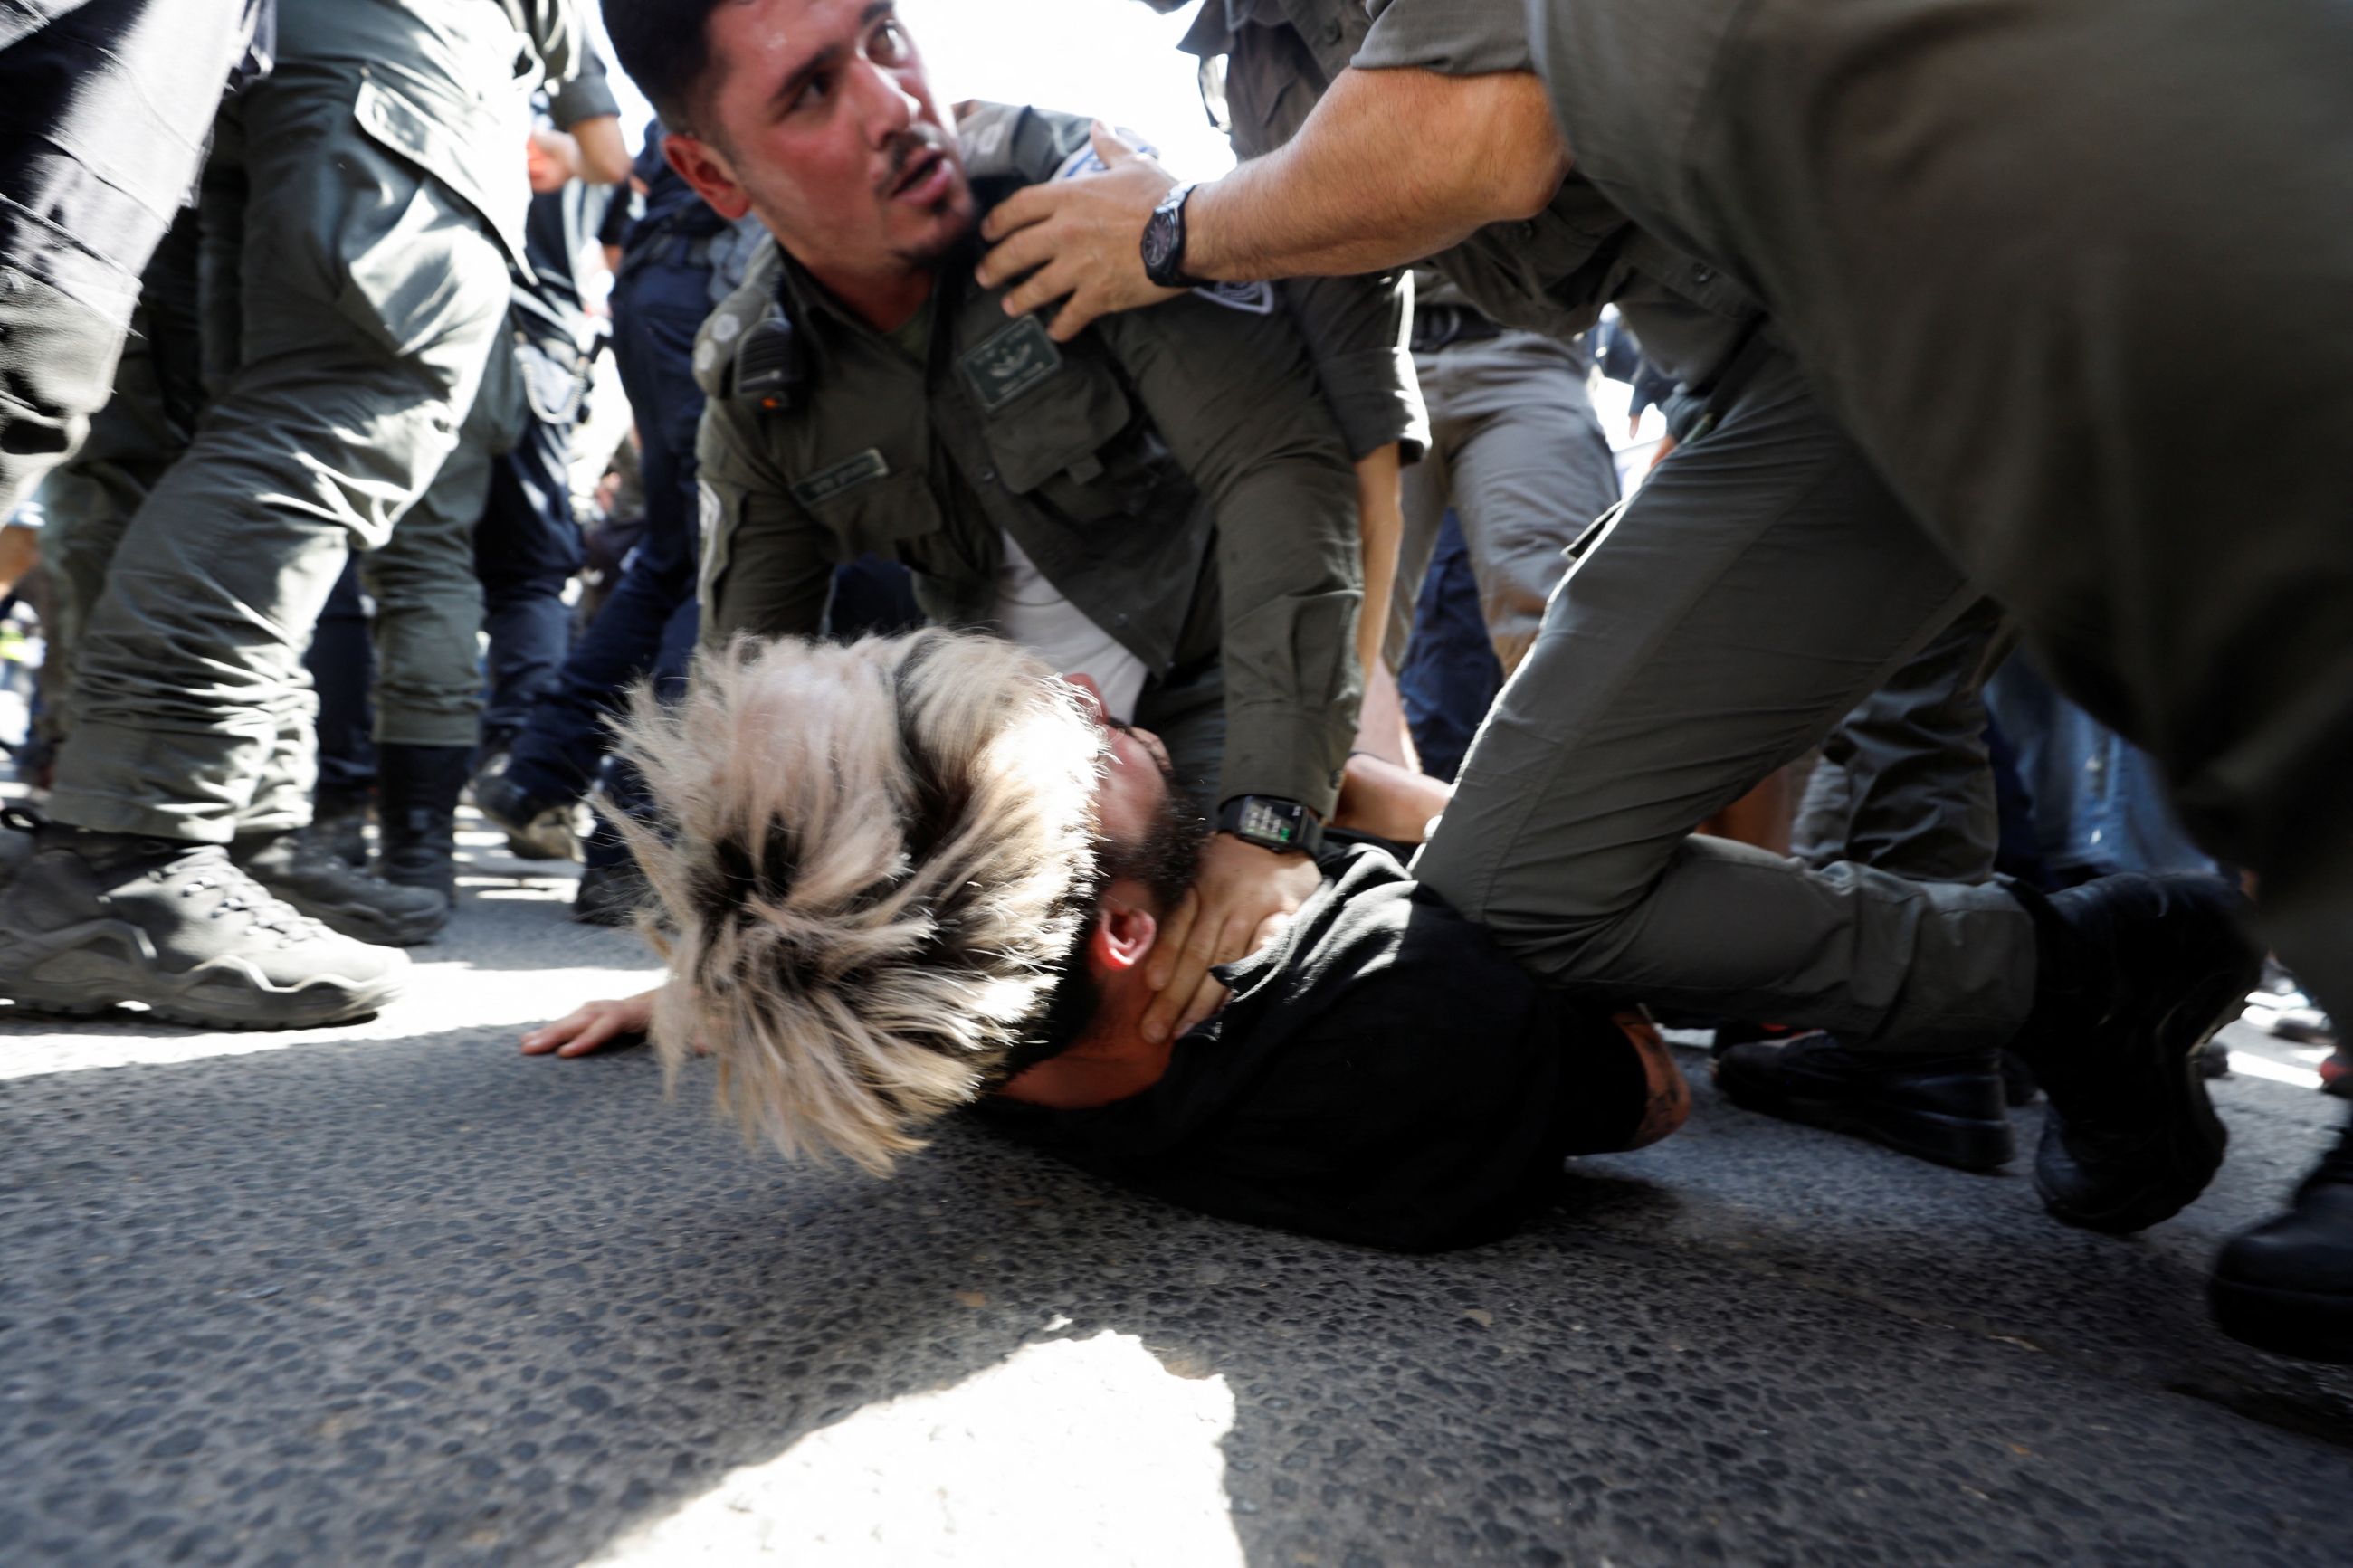 Israeli police detain a man during a demonstration in Tel Aviv on 1 March 2023 (Reuters)